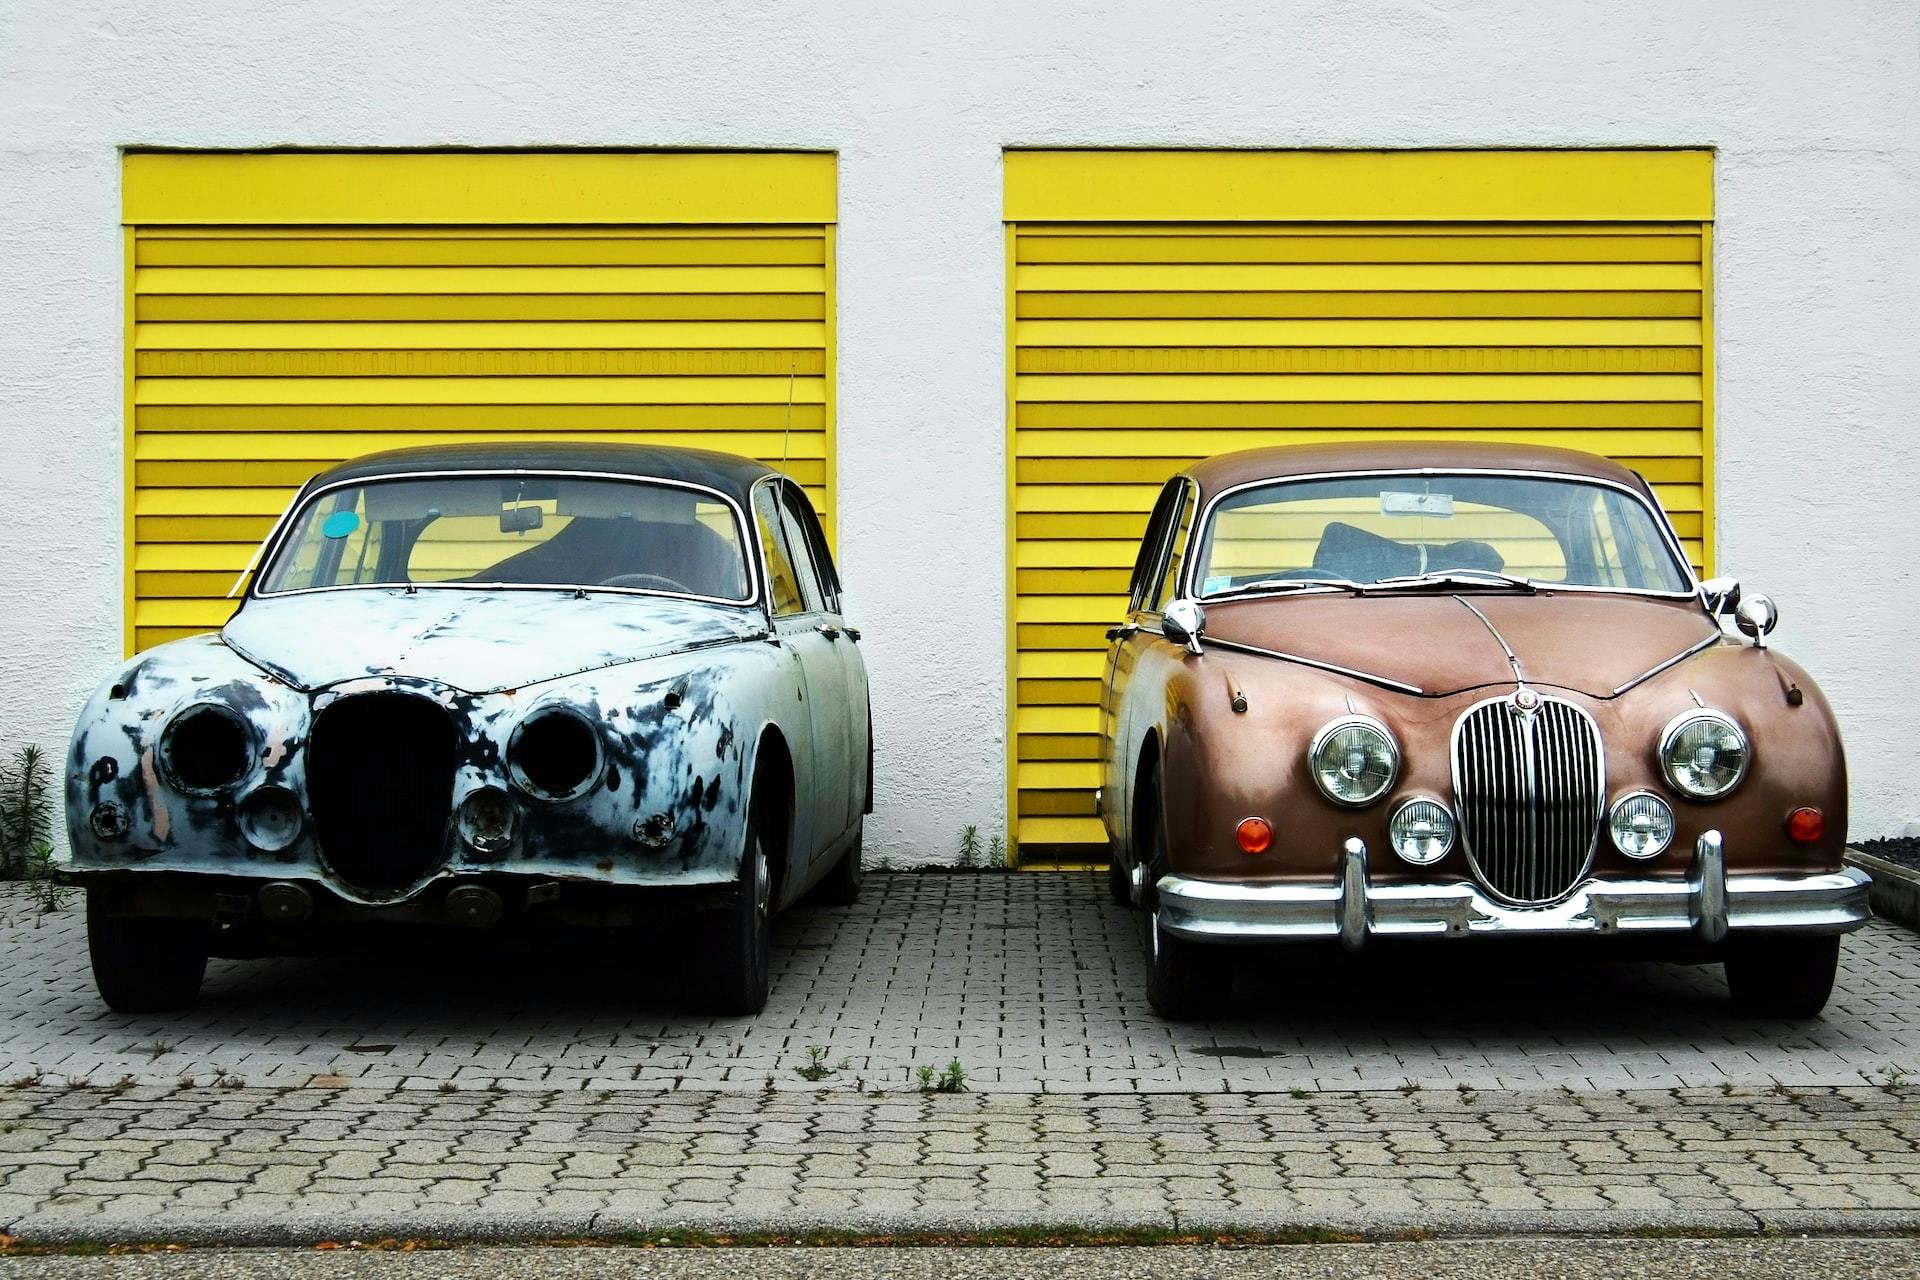 Image of two cars parked side by side. One is new and the other is old.